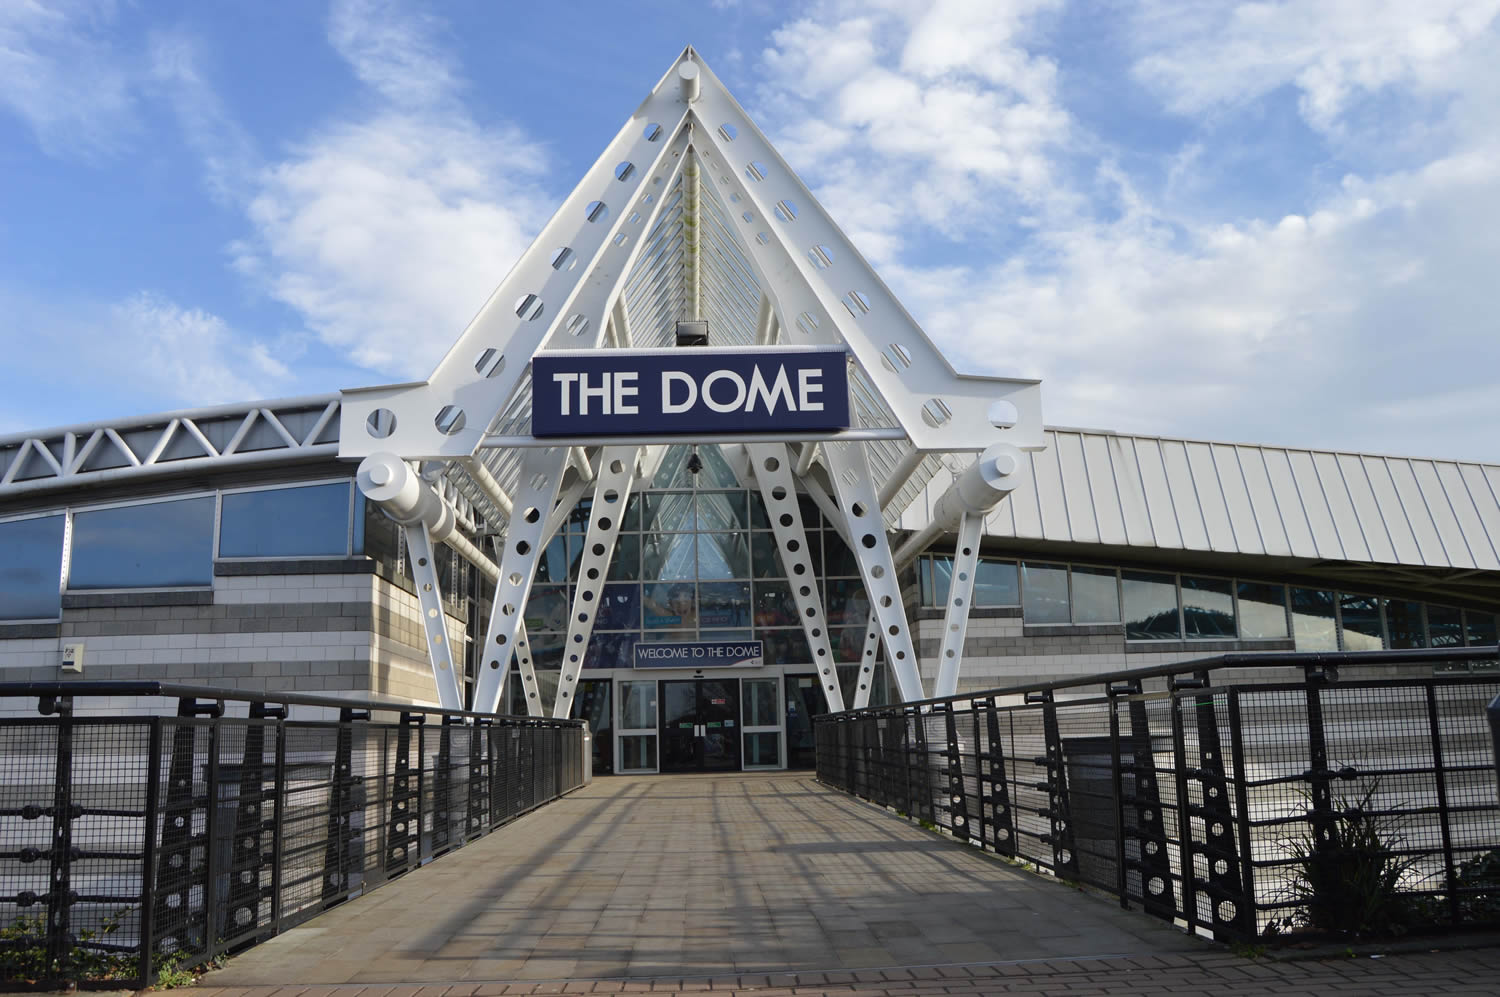 Image name Doncaster Dome the 18 image from the post Major Refurbishment for Doncaster's Premier Leisure Destination: The Dome in Yorkshire.com.